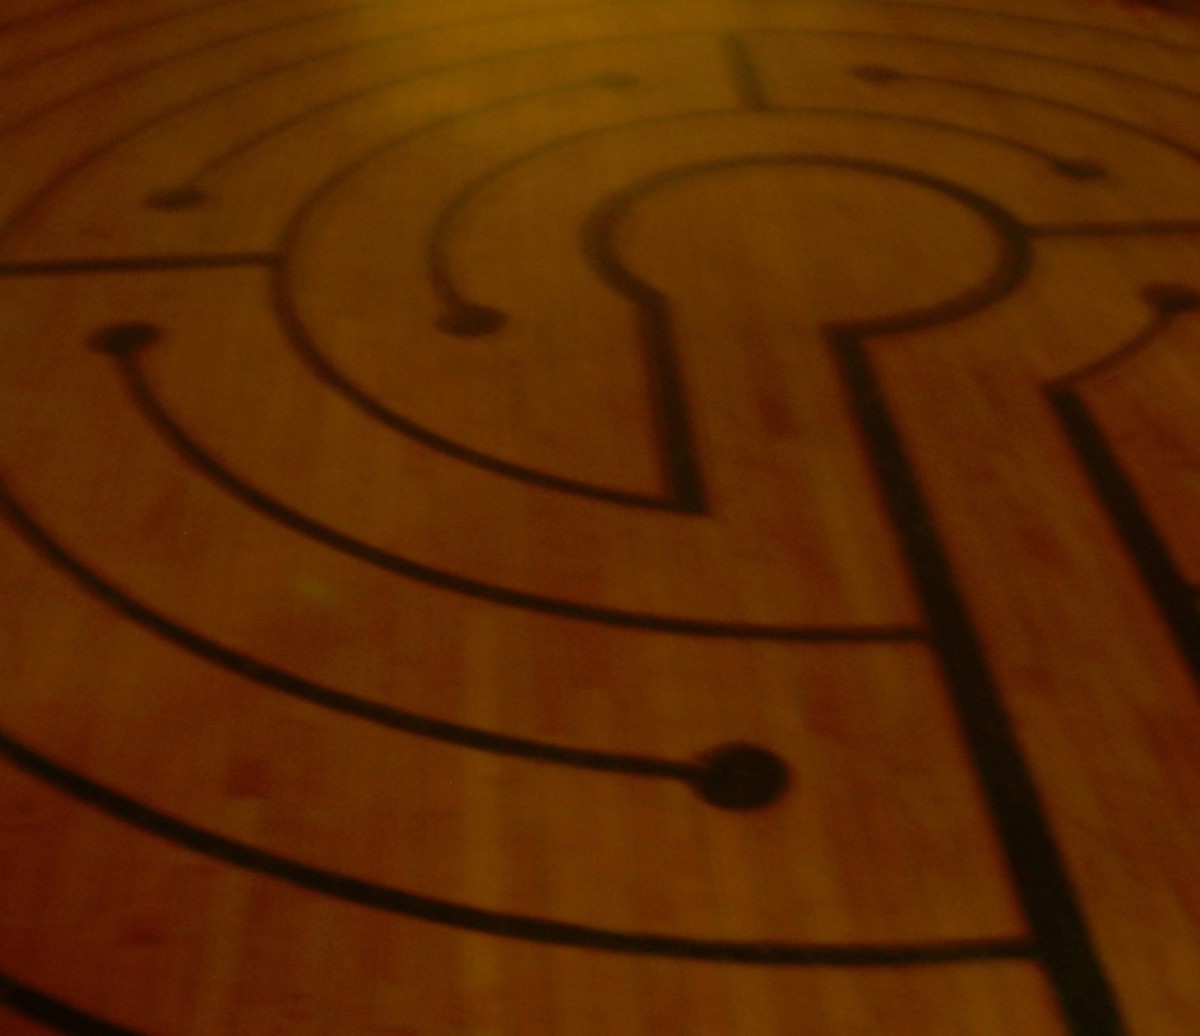 Piece of a labyrinth designed by Boticelli, located in the basement of St. Paul's Episcopal Cathedral on Tremont St., Boston